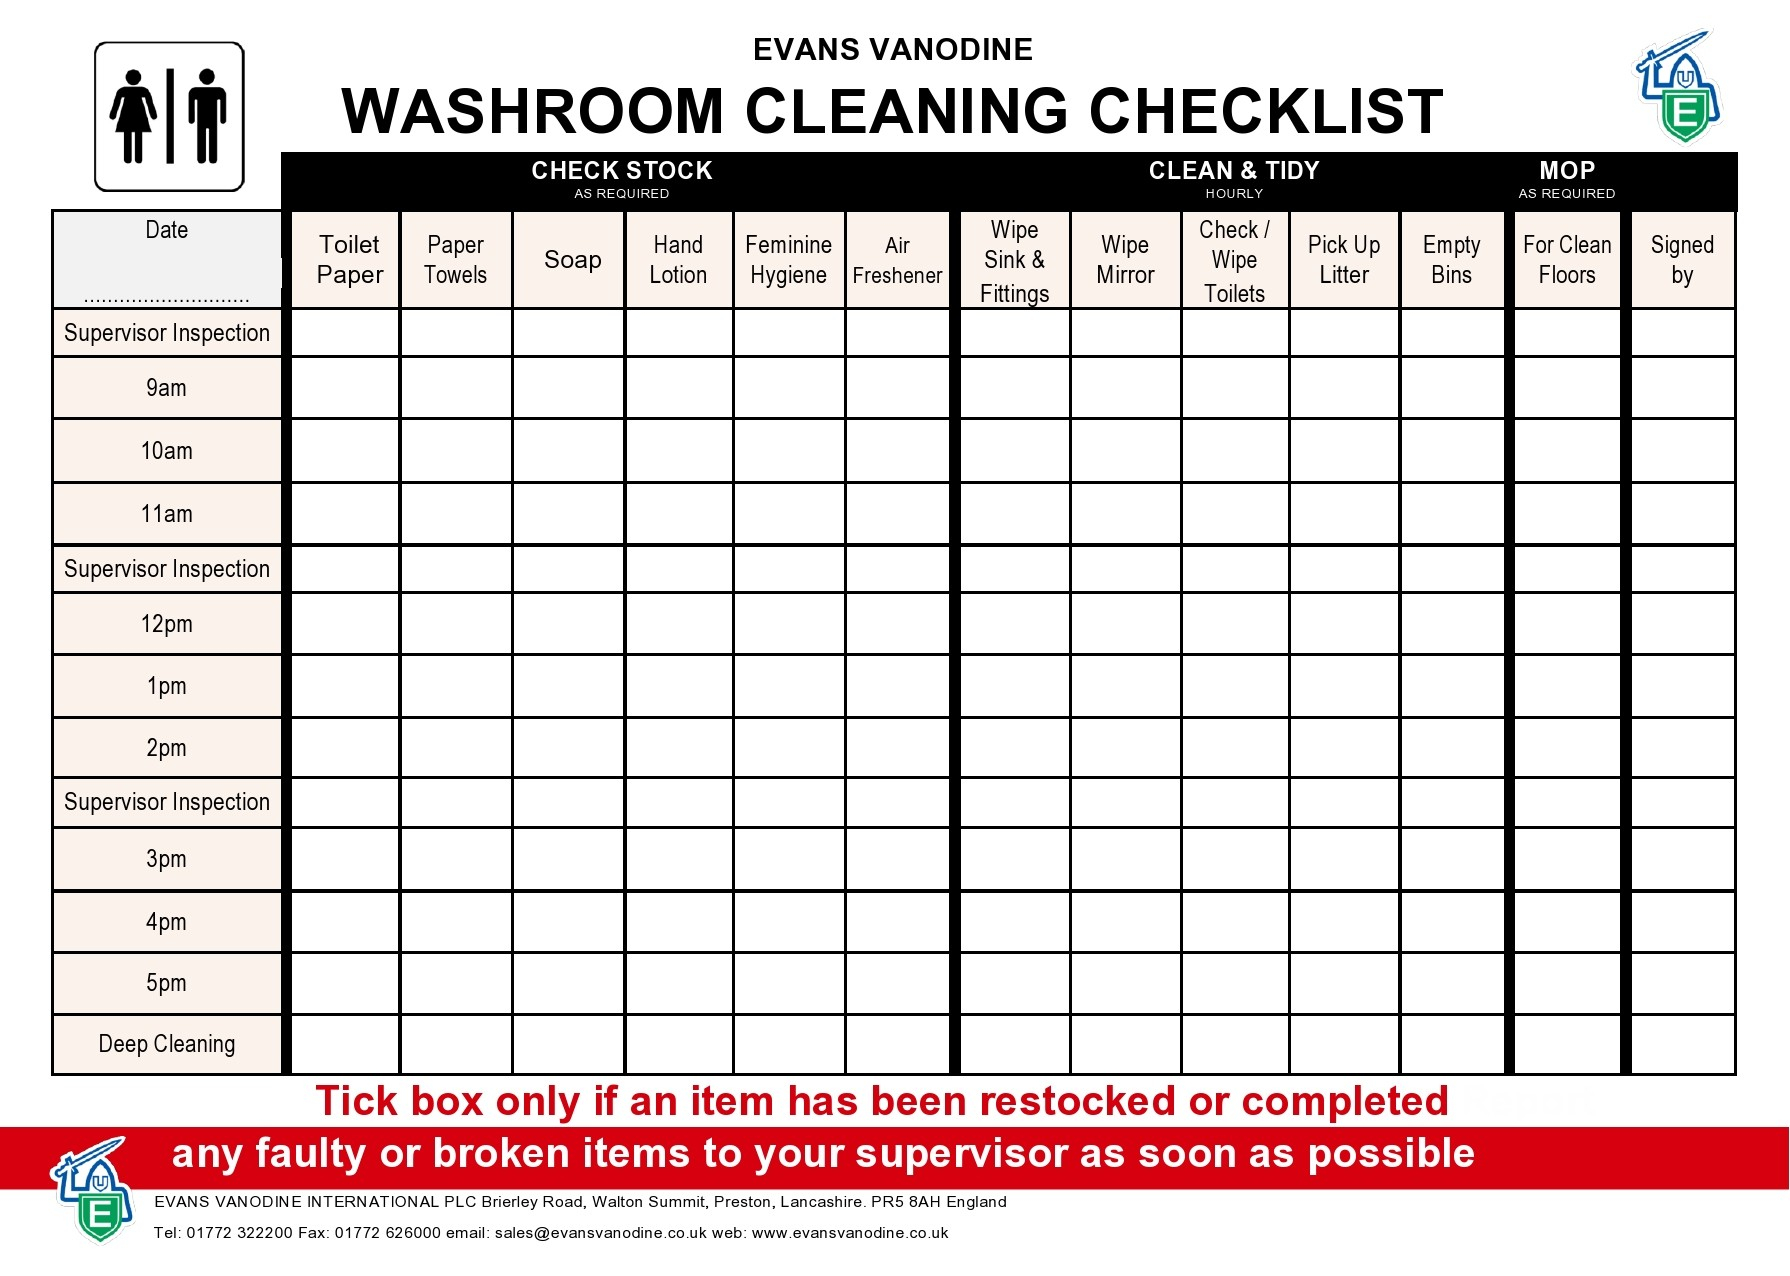 10 Printable Bathroom Cleaning Checklists [Word] ᐅ TemplateLab With Commercial Bathroom Cleaning Checklist Template For Commercial Bathroom Cleaning Checklist Template